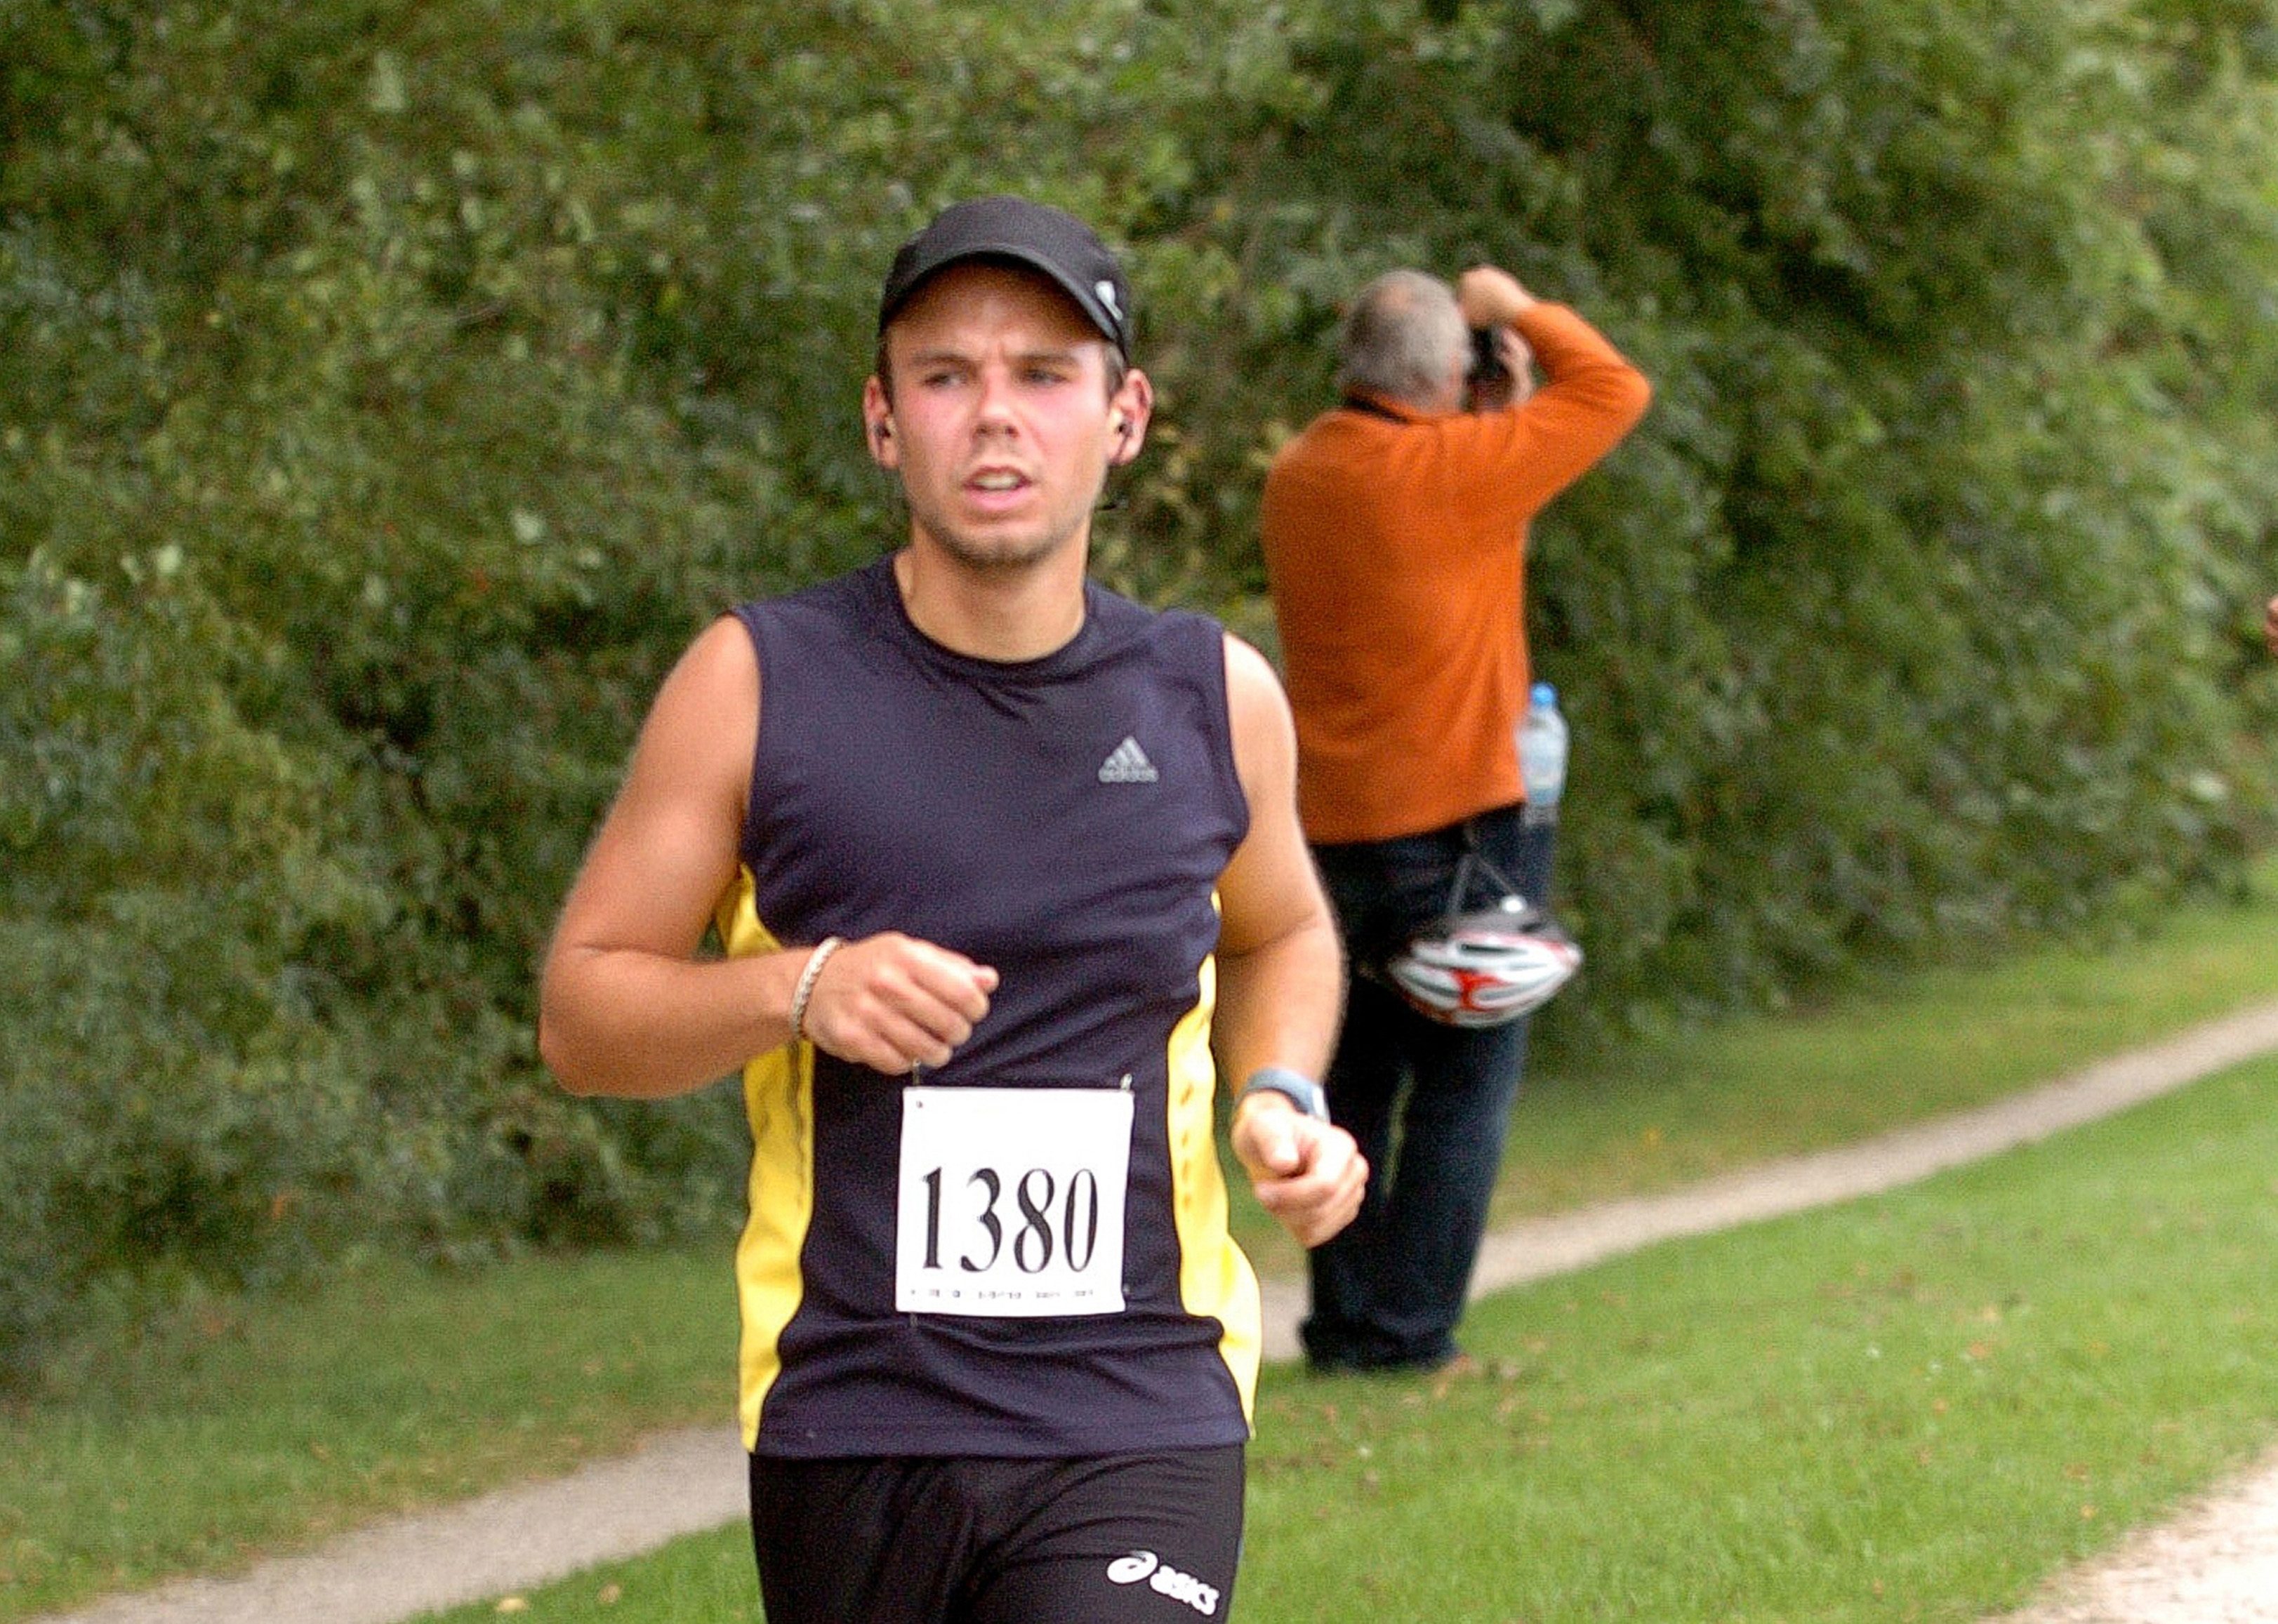 ILL PILOT. A file picture showing Andreas Lubitz, co-pilot of Germanwings flight 4U9525, running during the Aerportrace in Hamburg, Germany, September 13, 2009. File photo by EPA 